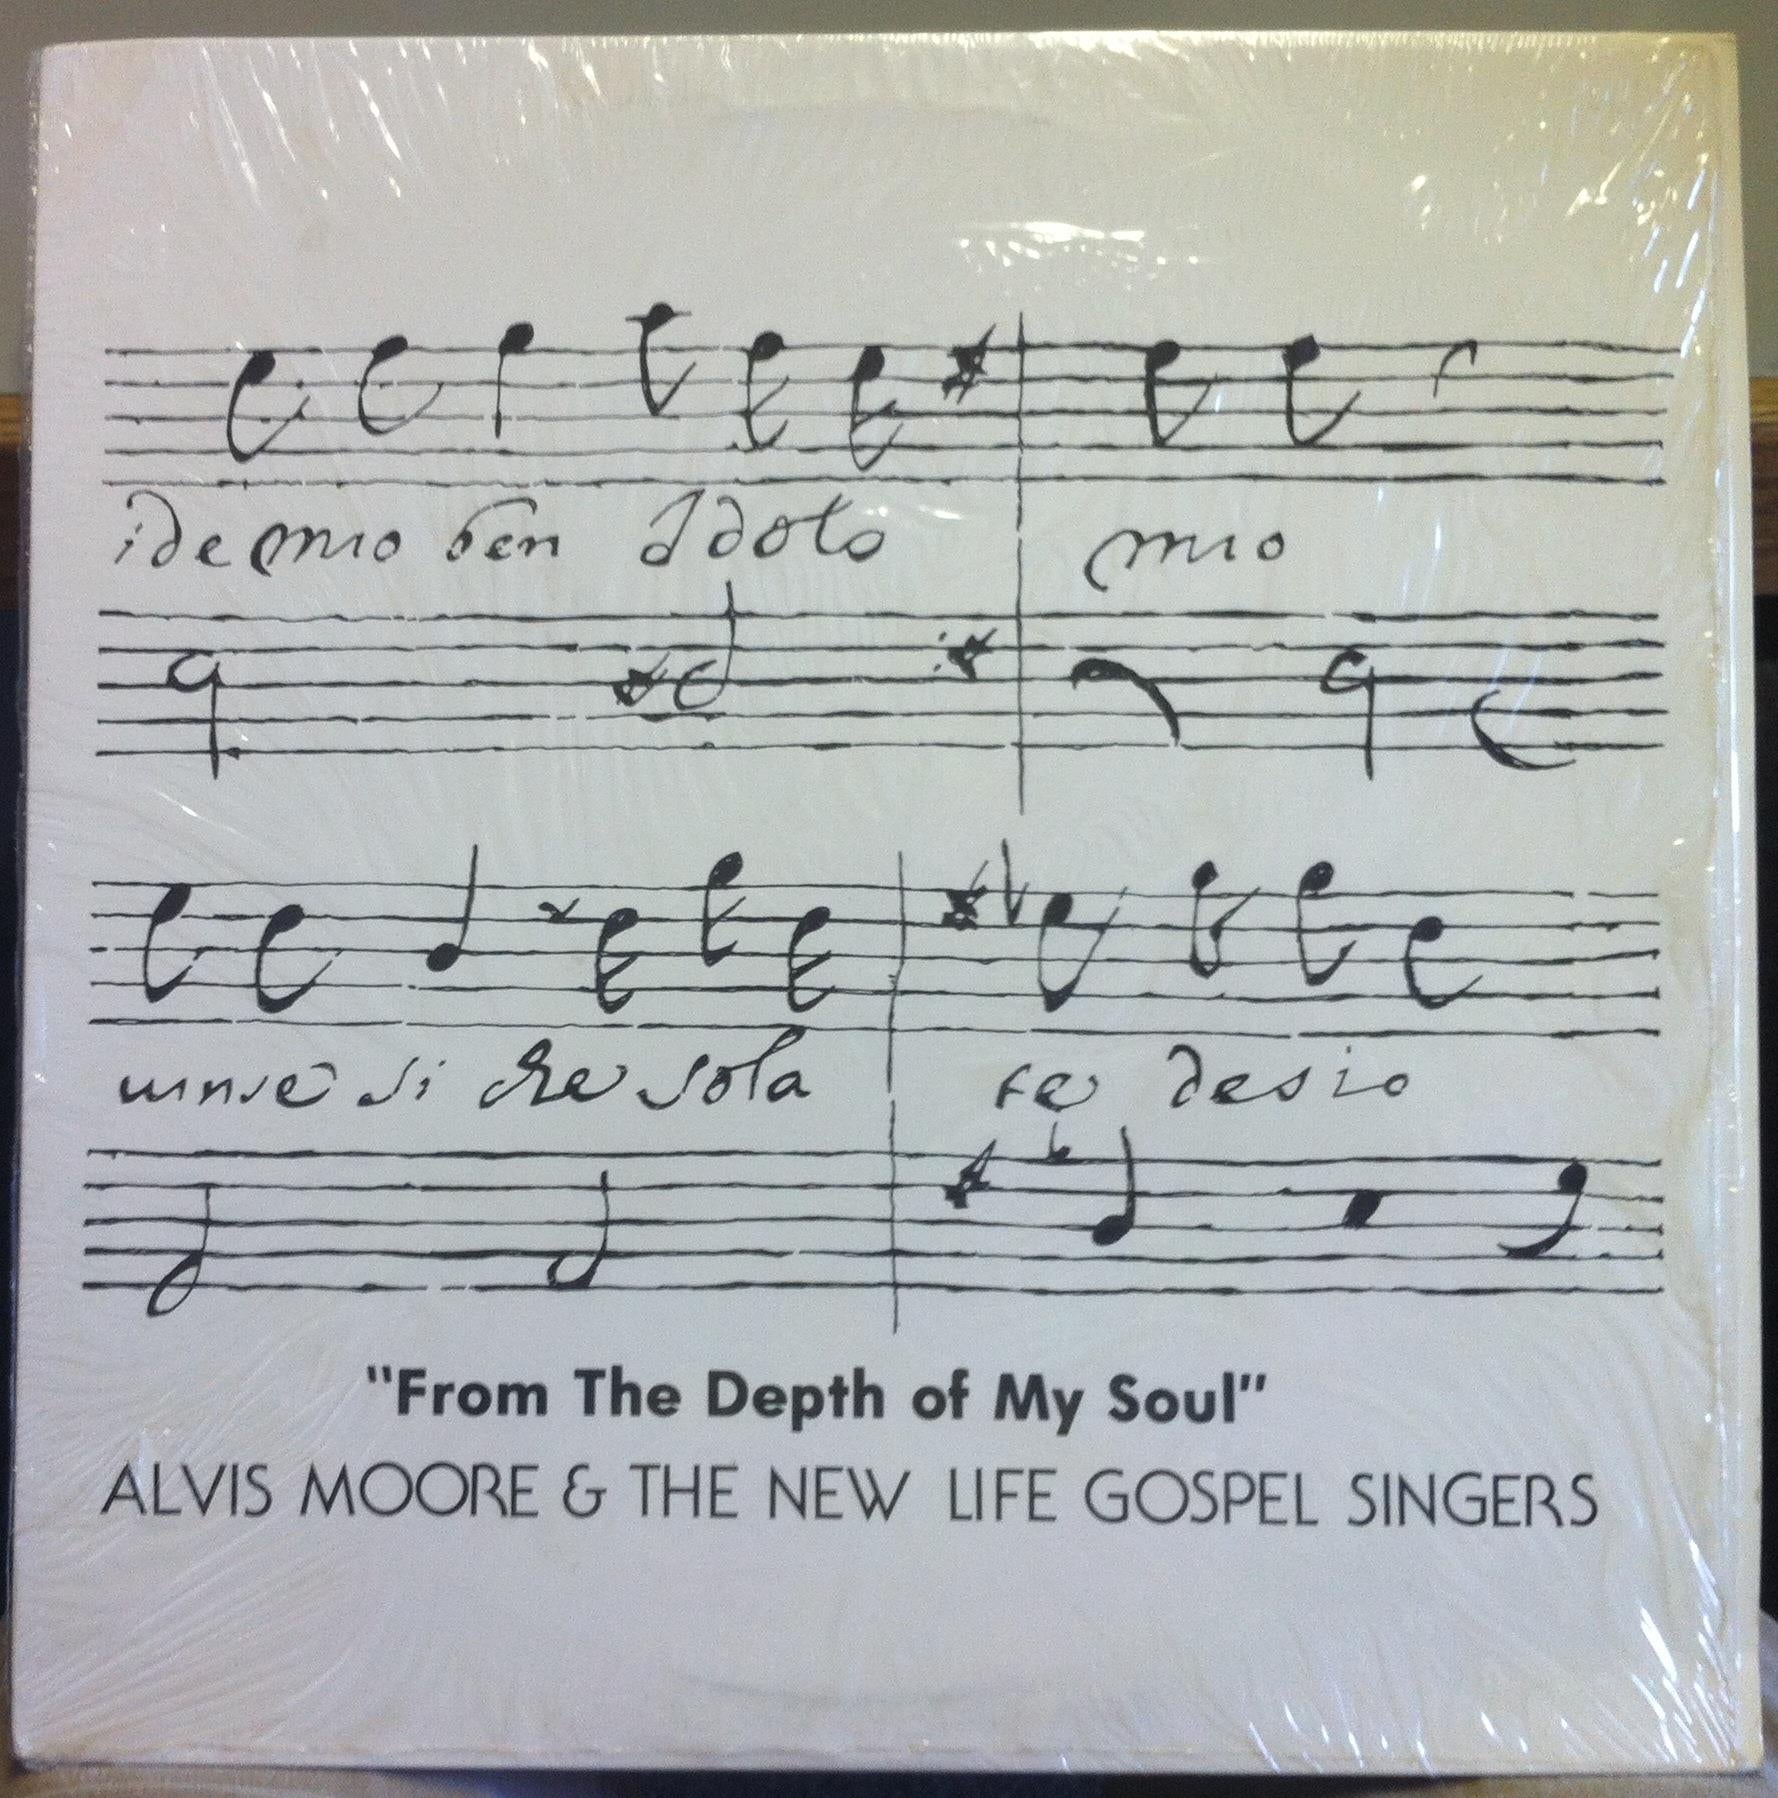 ALVIS MOORE & NEW LIFE from the depth of my soul LP VG+ Private Soul Funk GOSPEL